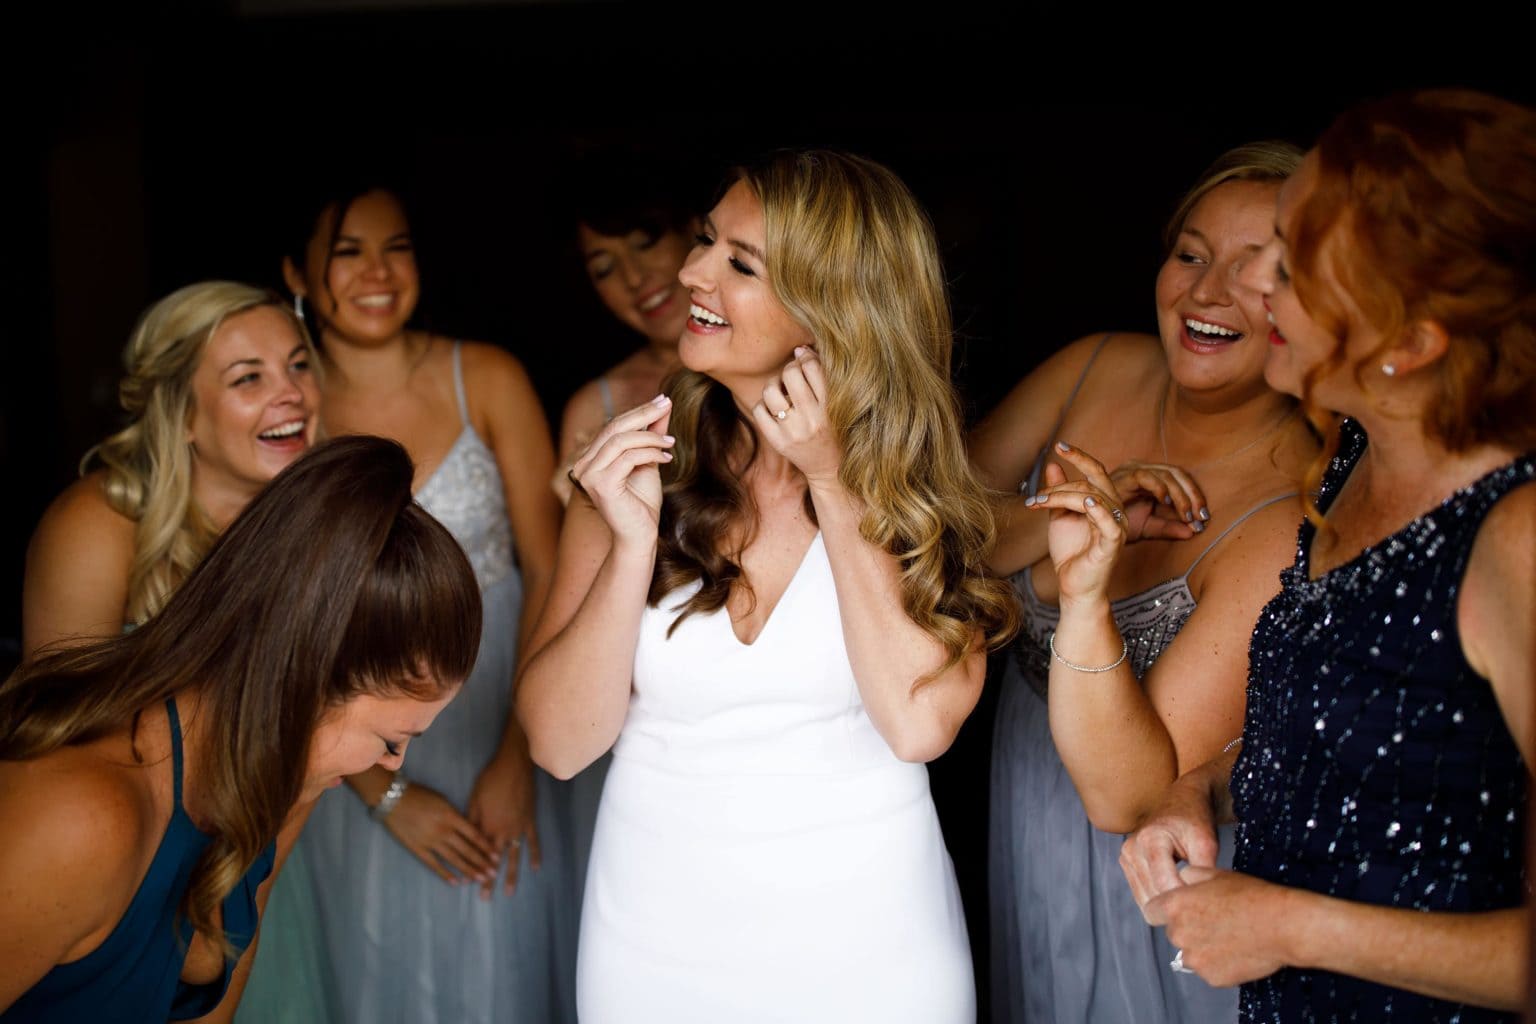 The bride puts on earrings with bridesmaids in Breckenridge